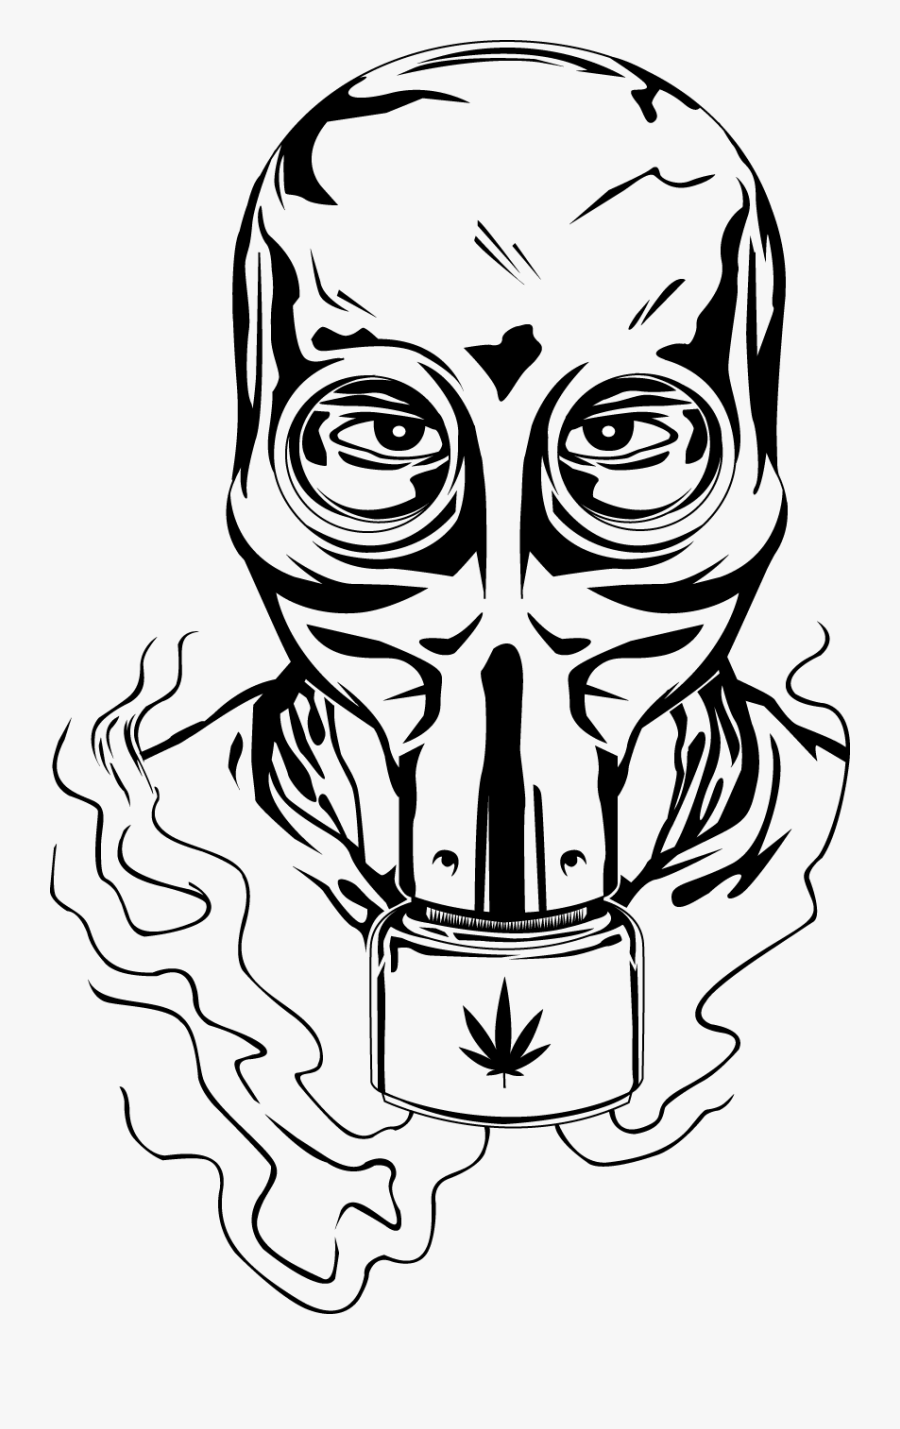 Gas Mask Clipart Smoke Drawing - Gas Mask Bong Drawing, Transparent Clipart